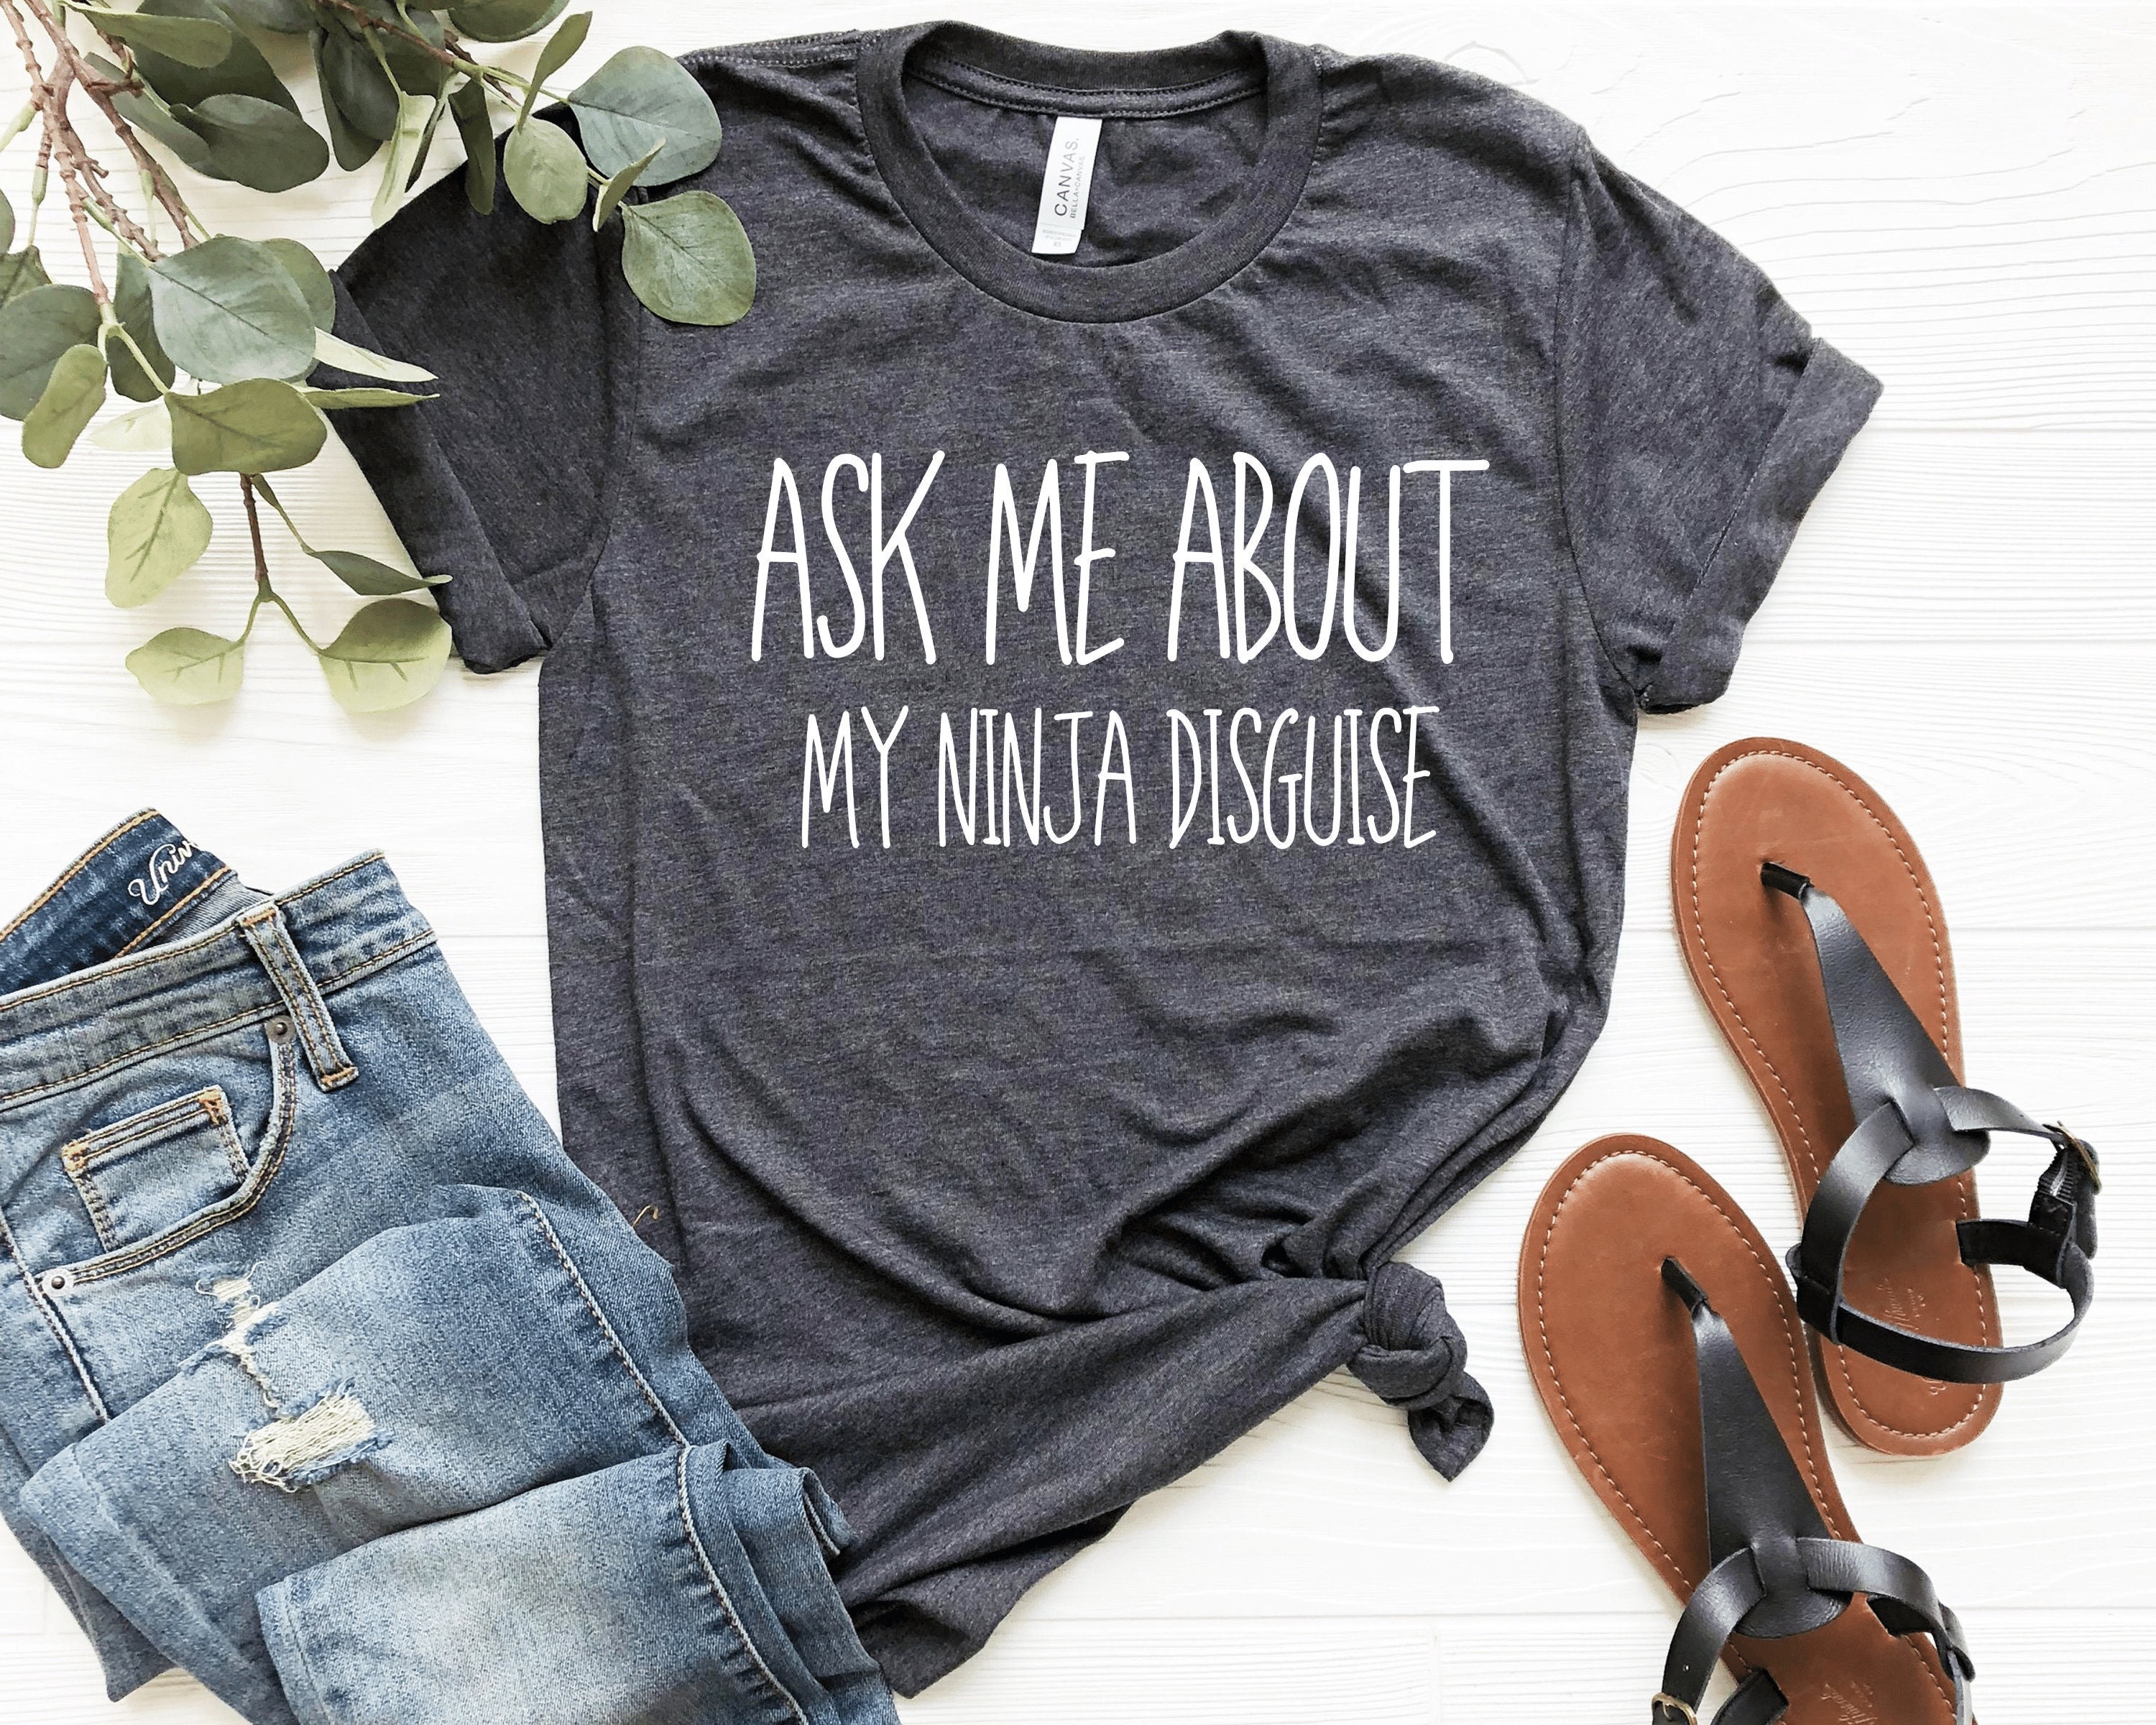 Youth Ask Me About My Ninja Disguise T Shirt Funny Cool Costume Novelty  Gift Tee For Kids (Black) - M